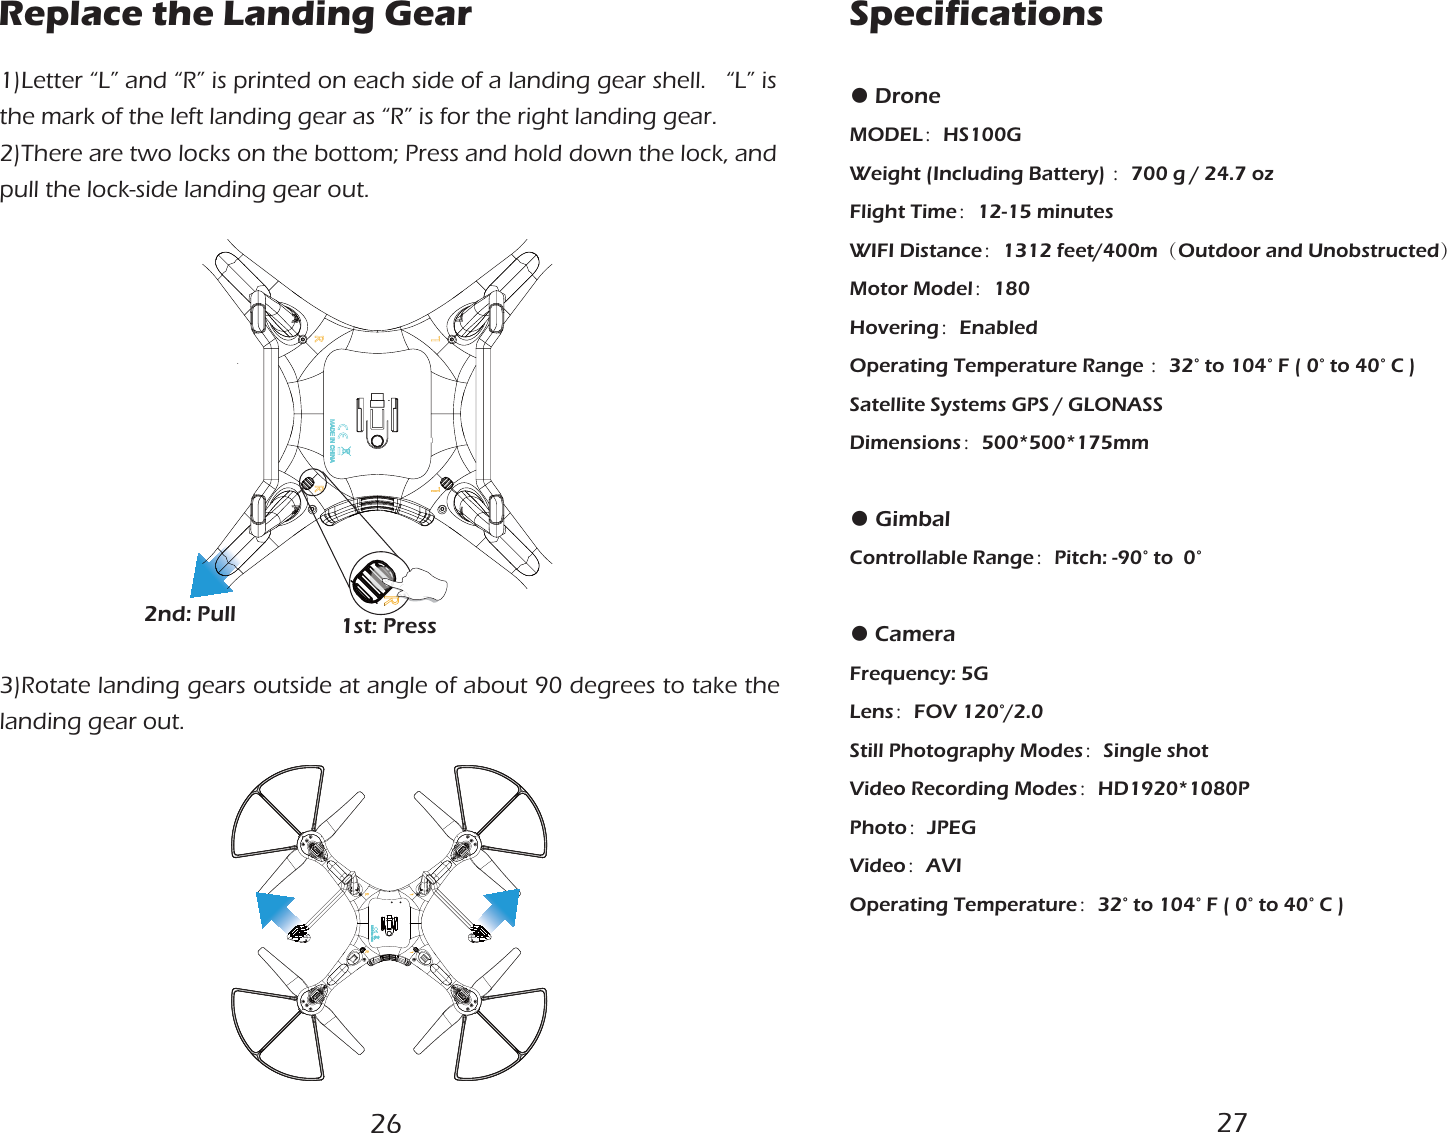 Replace the Landing Gear1st: Press2nd: Pull 1)Letter “L” and “R” is printed on each side of a landing gear shell.   “L” is the mark of the left landing gear as “R” is for the right landing gear.2)There are two locks on the bottom; Press and hold down the lock, and pull the lock-side landing gear out.3)Rotate landing gears outside at angle of about 90 degrees to take the landing gear out.● DroneMODEL：HS100GWeight (Including Battery) ：700 g / 24.7 ozFlight Time：12-15 minutesWIFI Distance：1312 feet/400m（Outdoor and Unobstructed）Motor Model：180Hovering：EnabledOperating Temperature Range ：32° to 104° F ( 0° to 40° C )Satellite Systems GPS / GLONASSDimensions：500*500*175mm● GimbalControllable Range：Pitch: -90° to  0°● CameraFrequency: 5GLens：FOV 120°/2.0 Still Photography Modes：Single shotVideo Recording Modes：HD1920*1080PPhoto：JPEG Video：AVI Operating Temperature：32° to 104° F ( 0° to 40° C )Specifications26 27